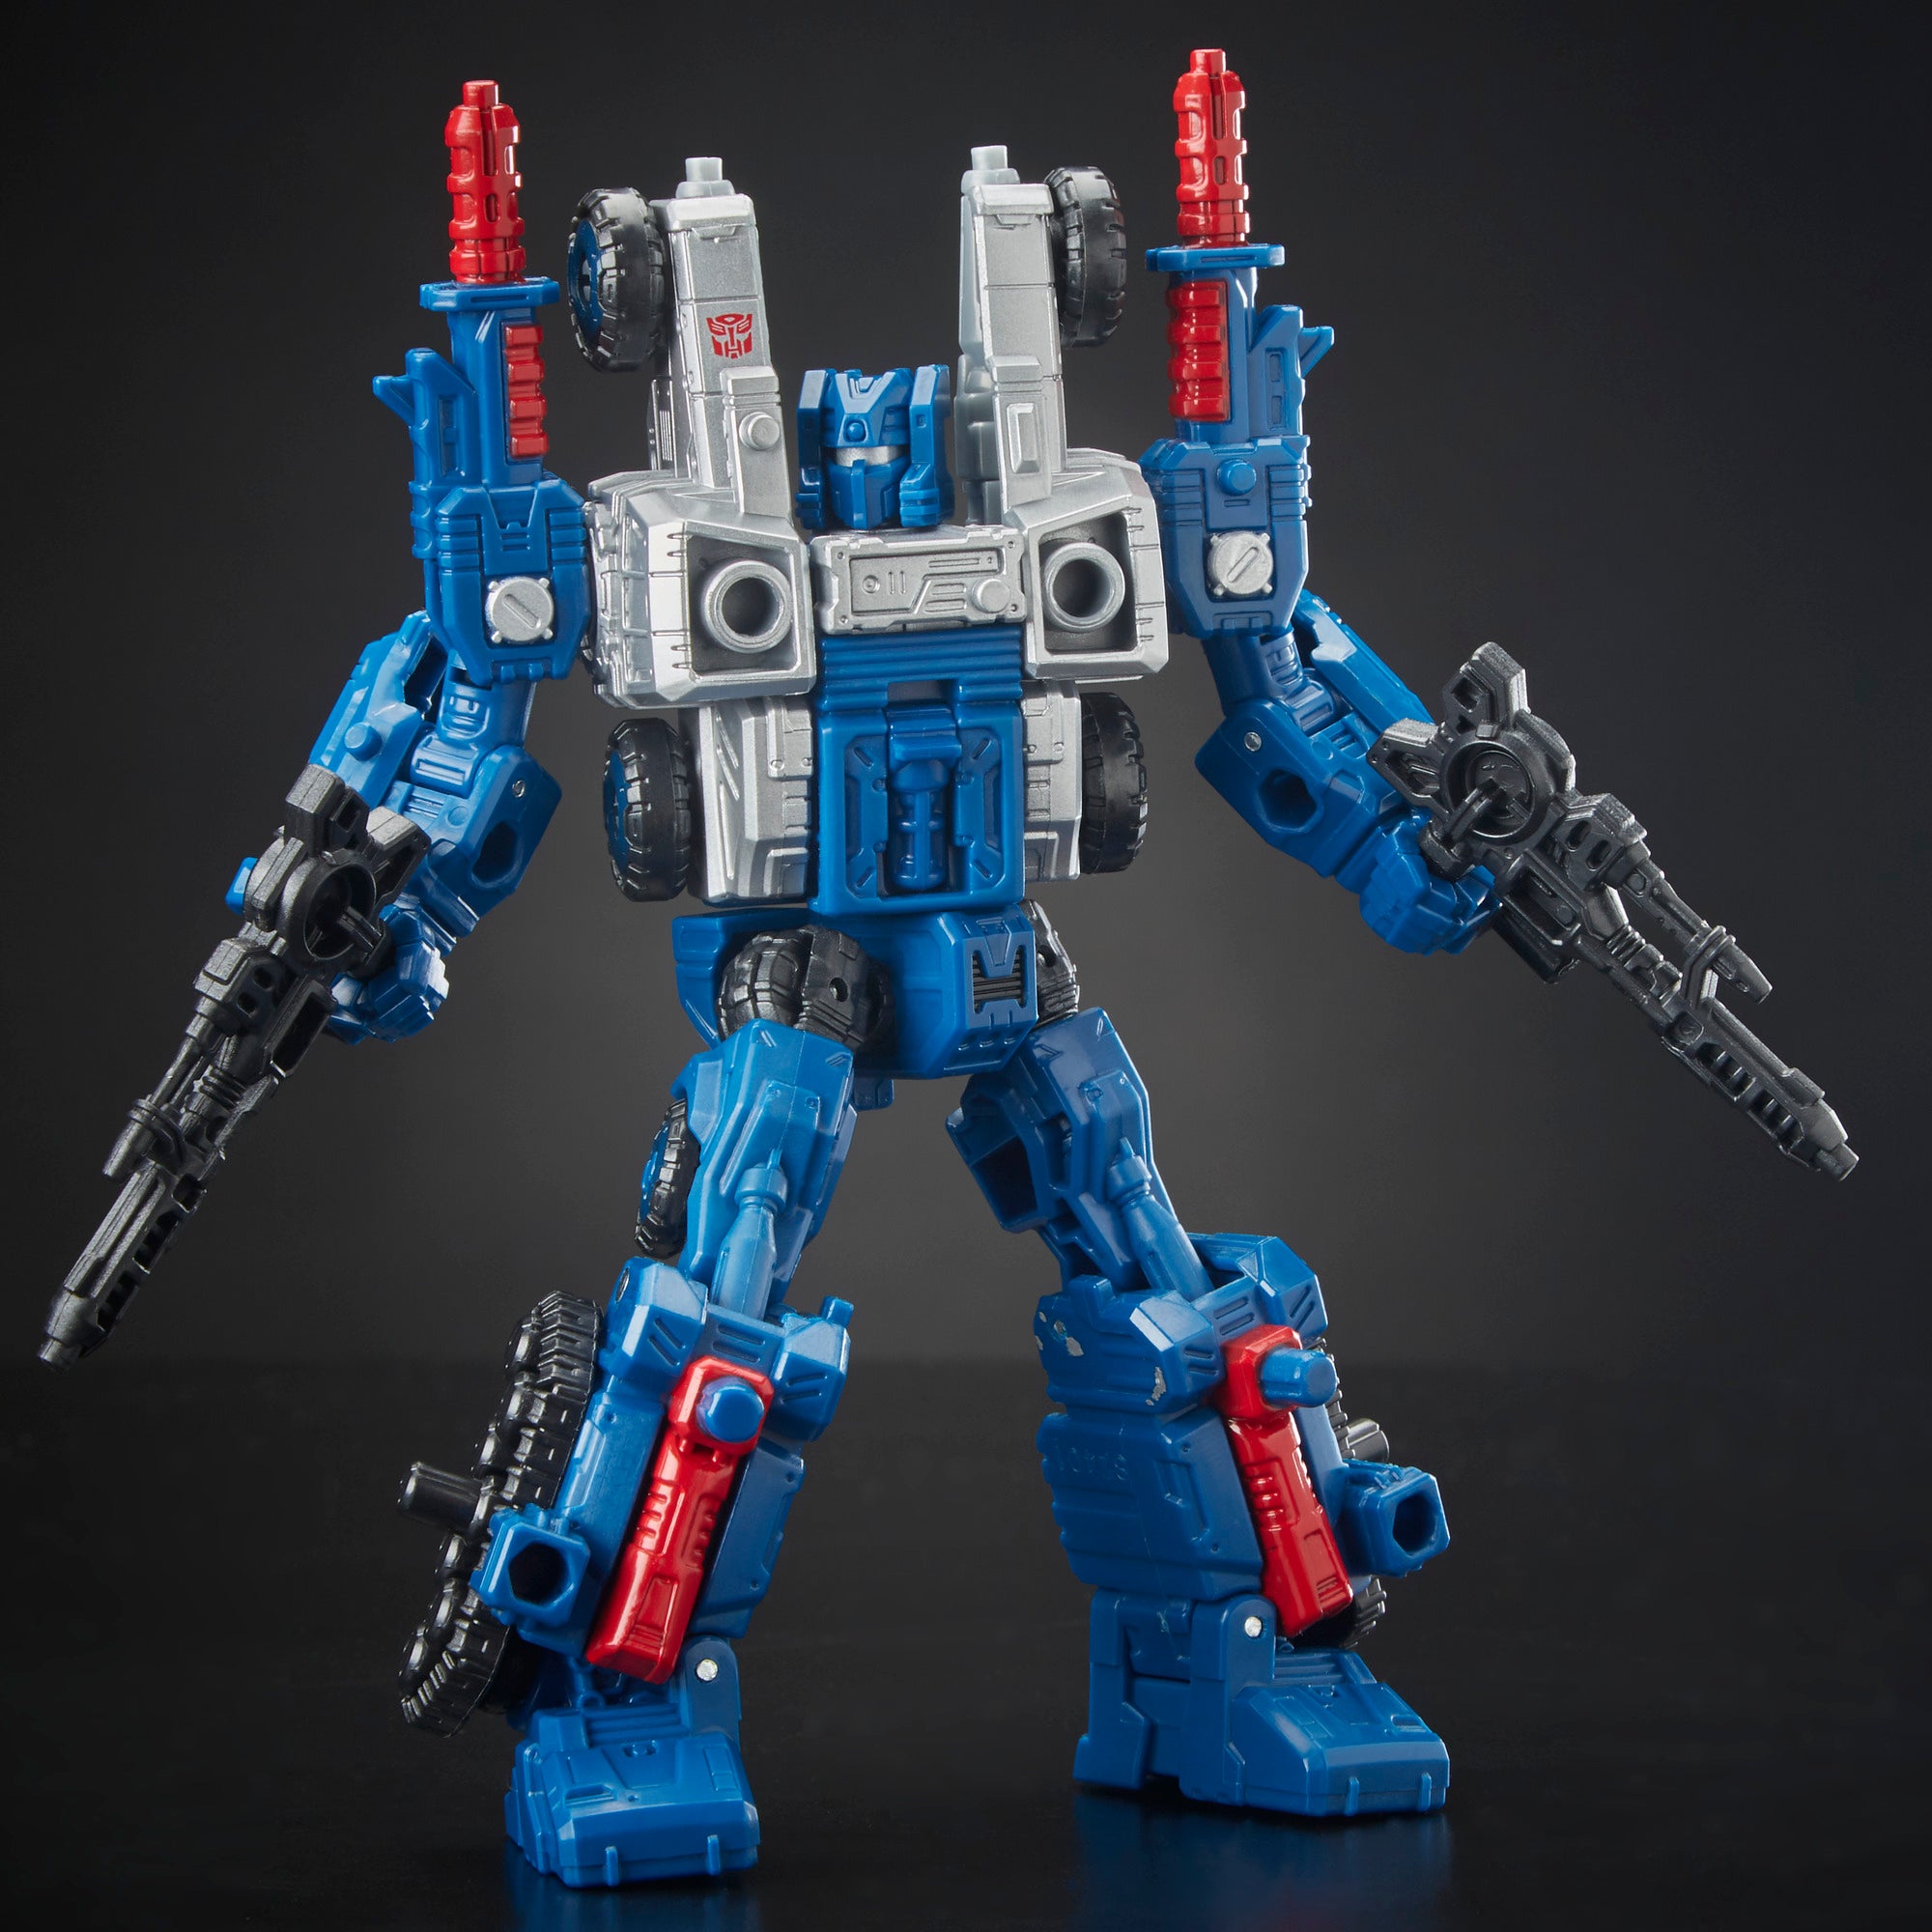 Siege Deluxe Class WFC-S8 